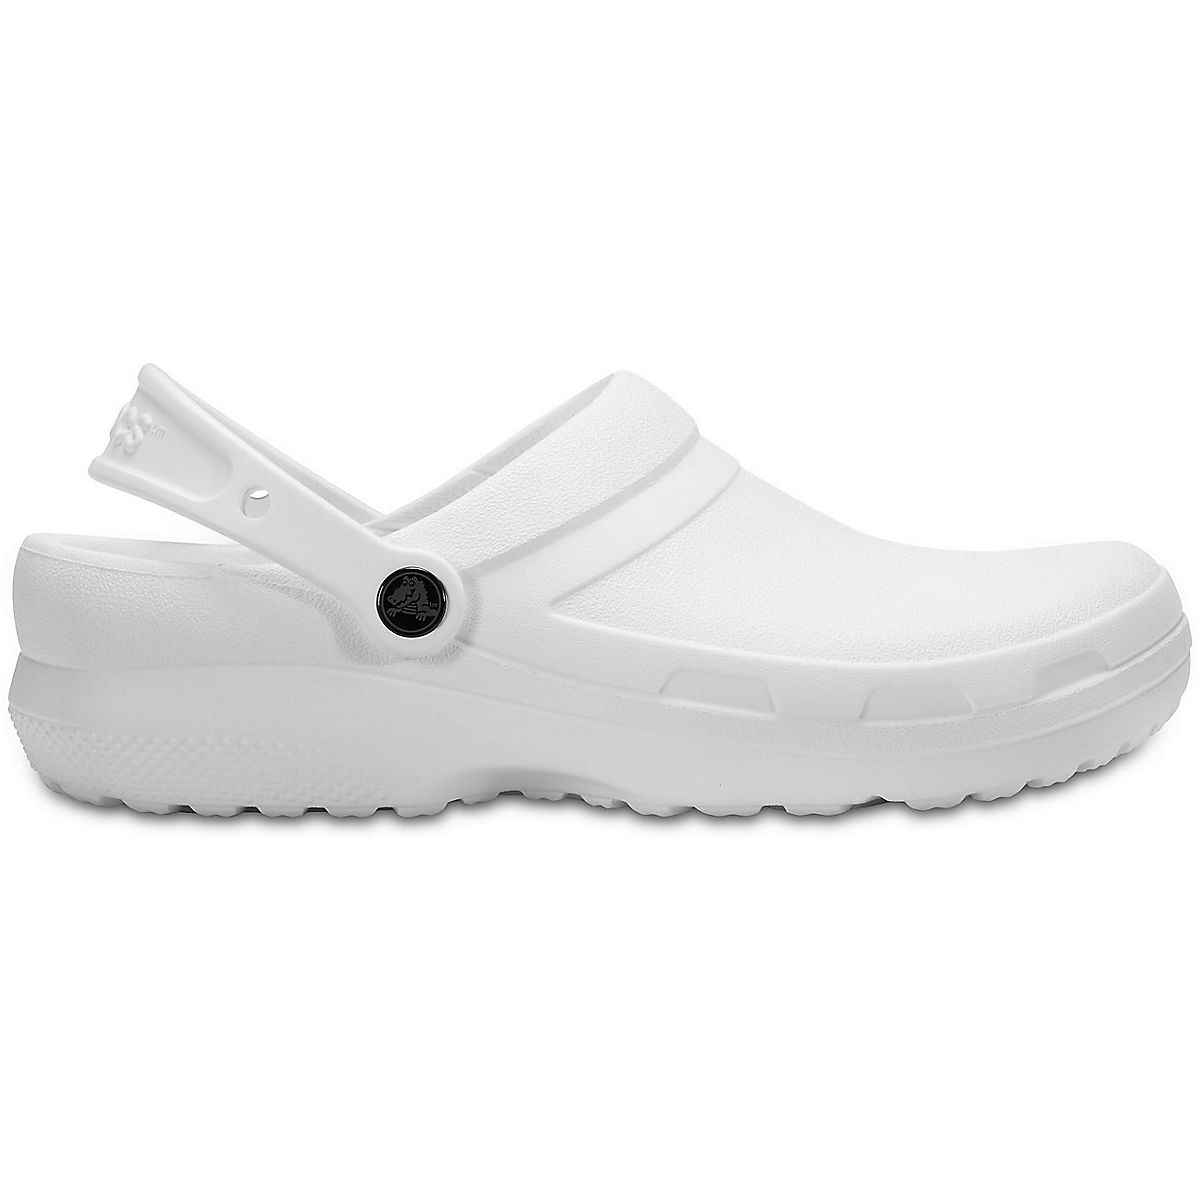 Crocs Men's Specialist II Clogs | Free Shipping at Academy